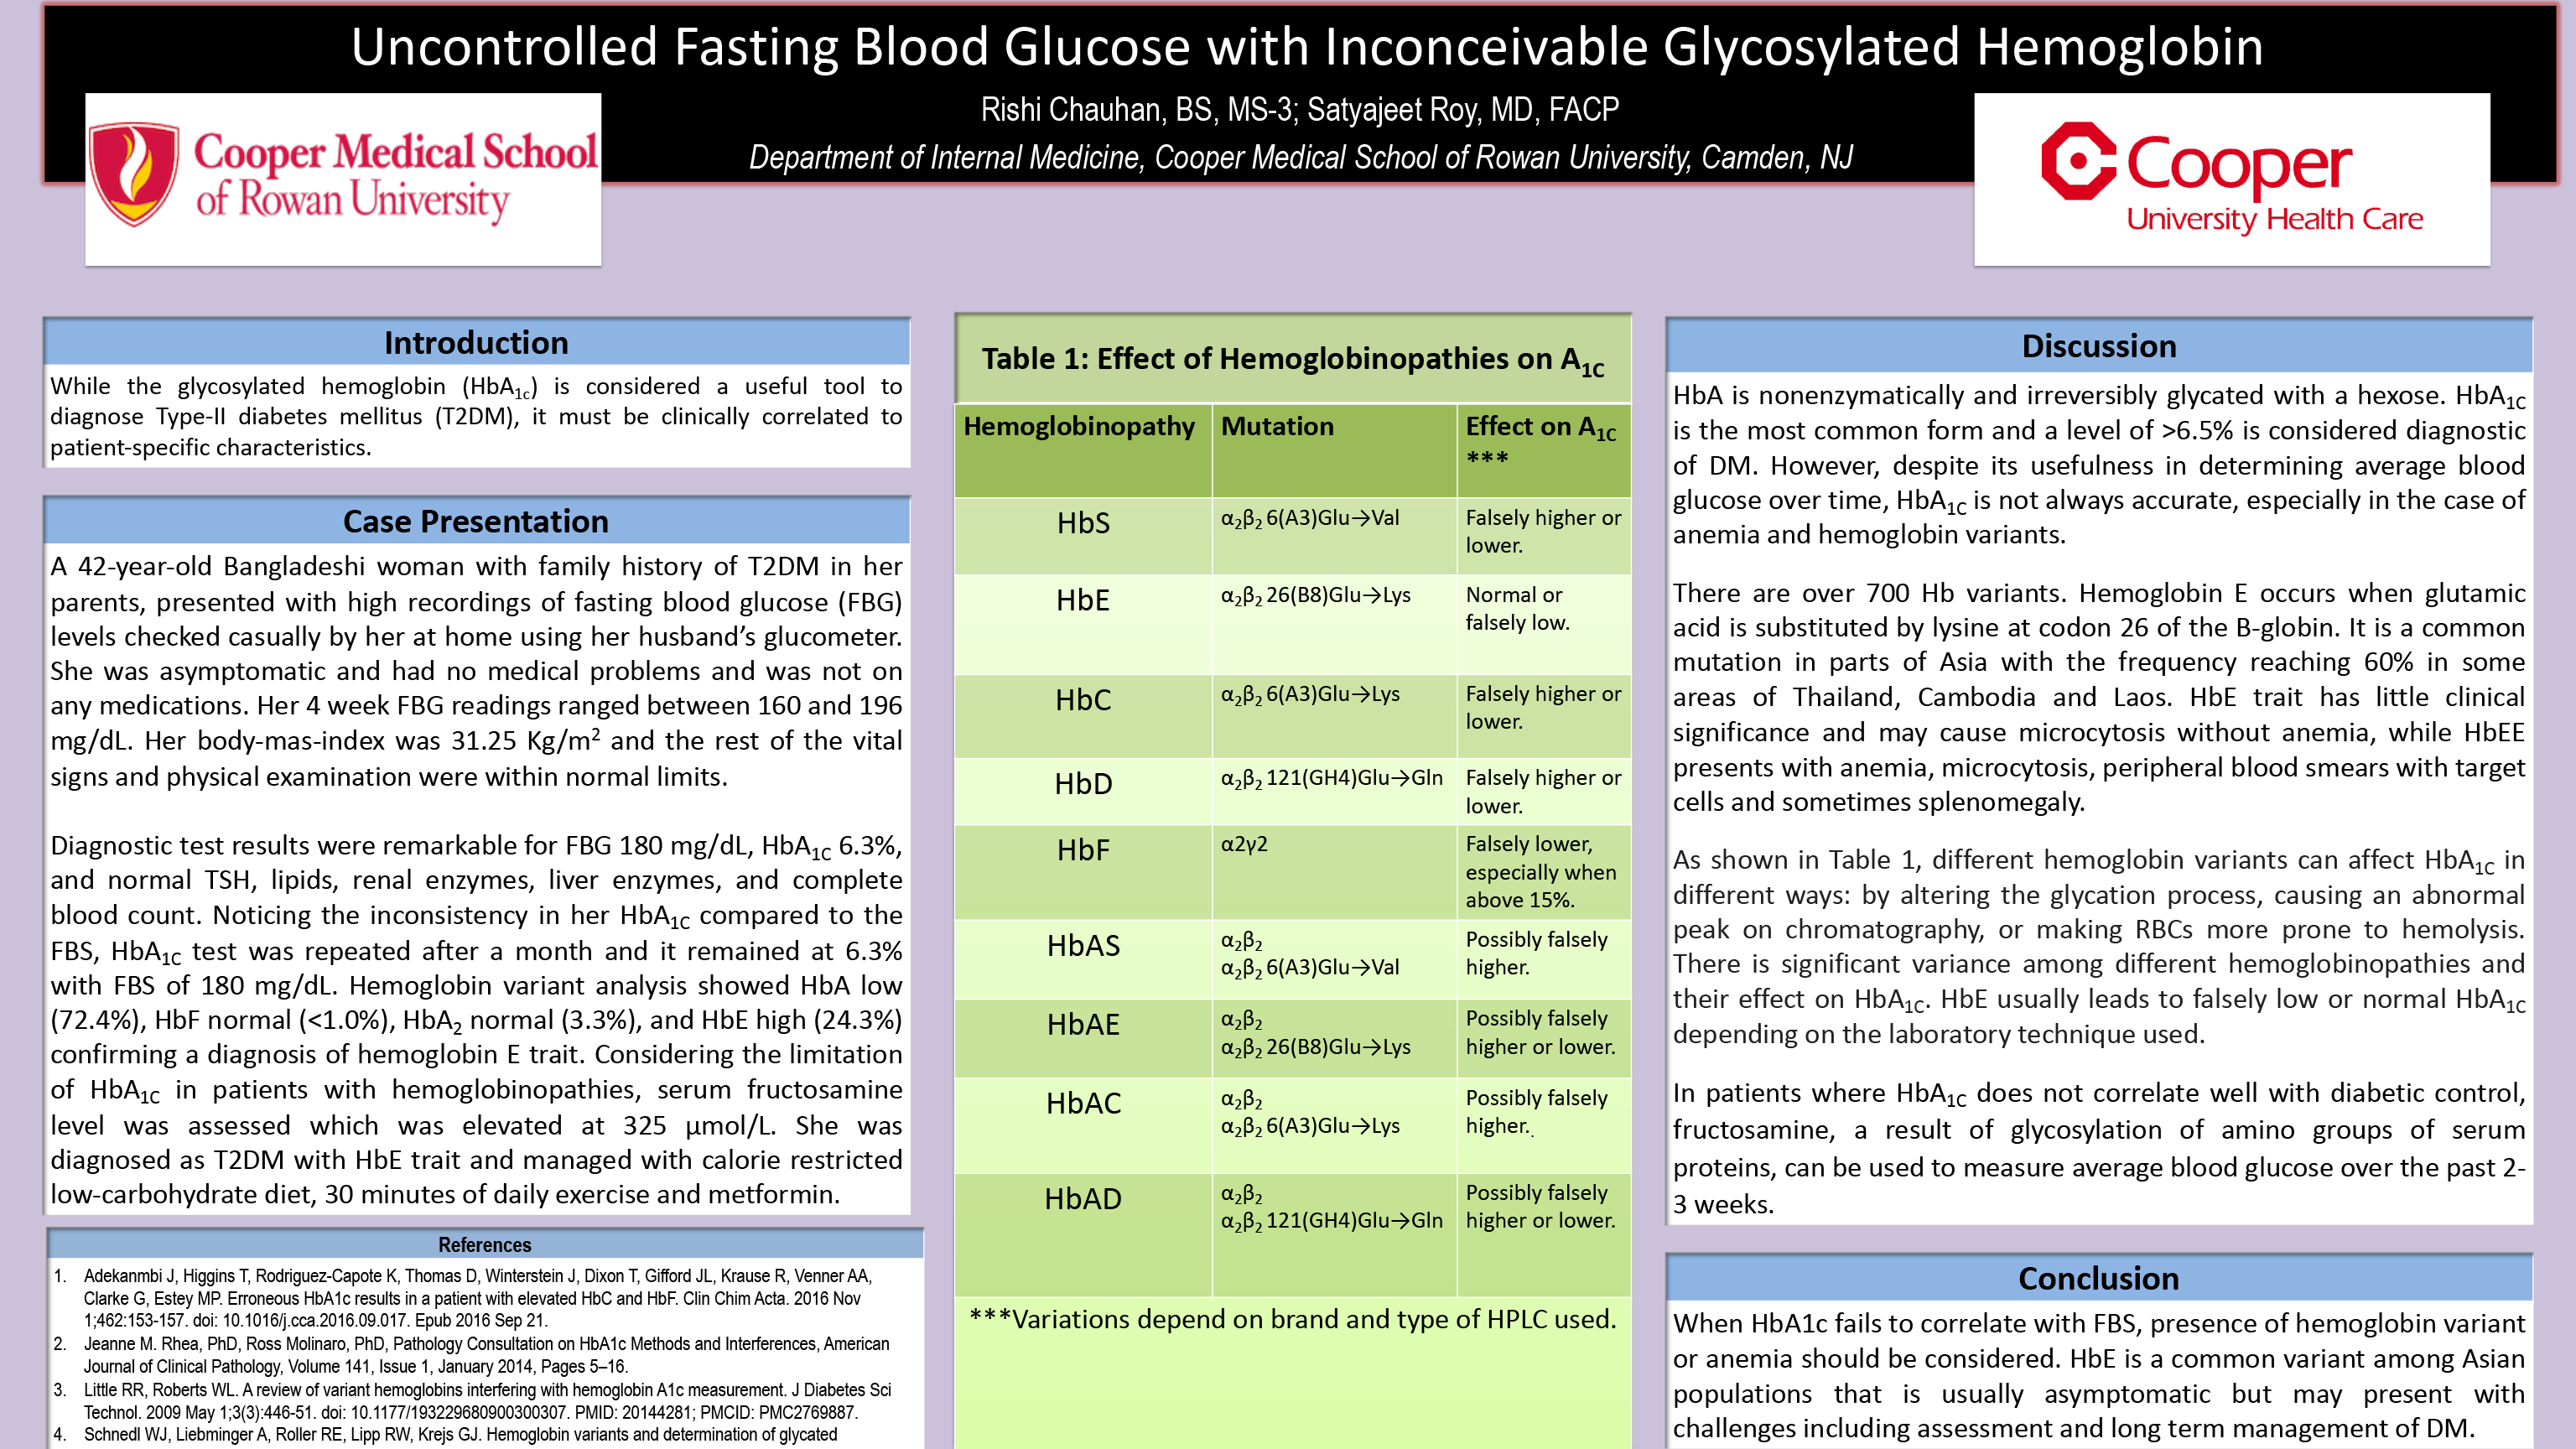 40-CVS-9-Uncontrolled Fasting Blood Glucose with Inconceivable Glycosylated Hemoglobin